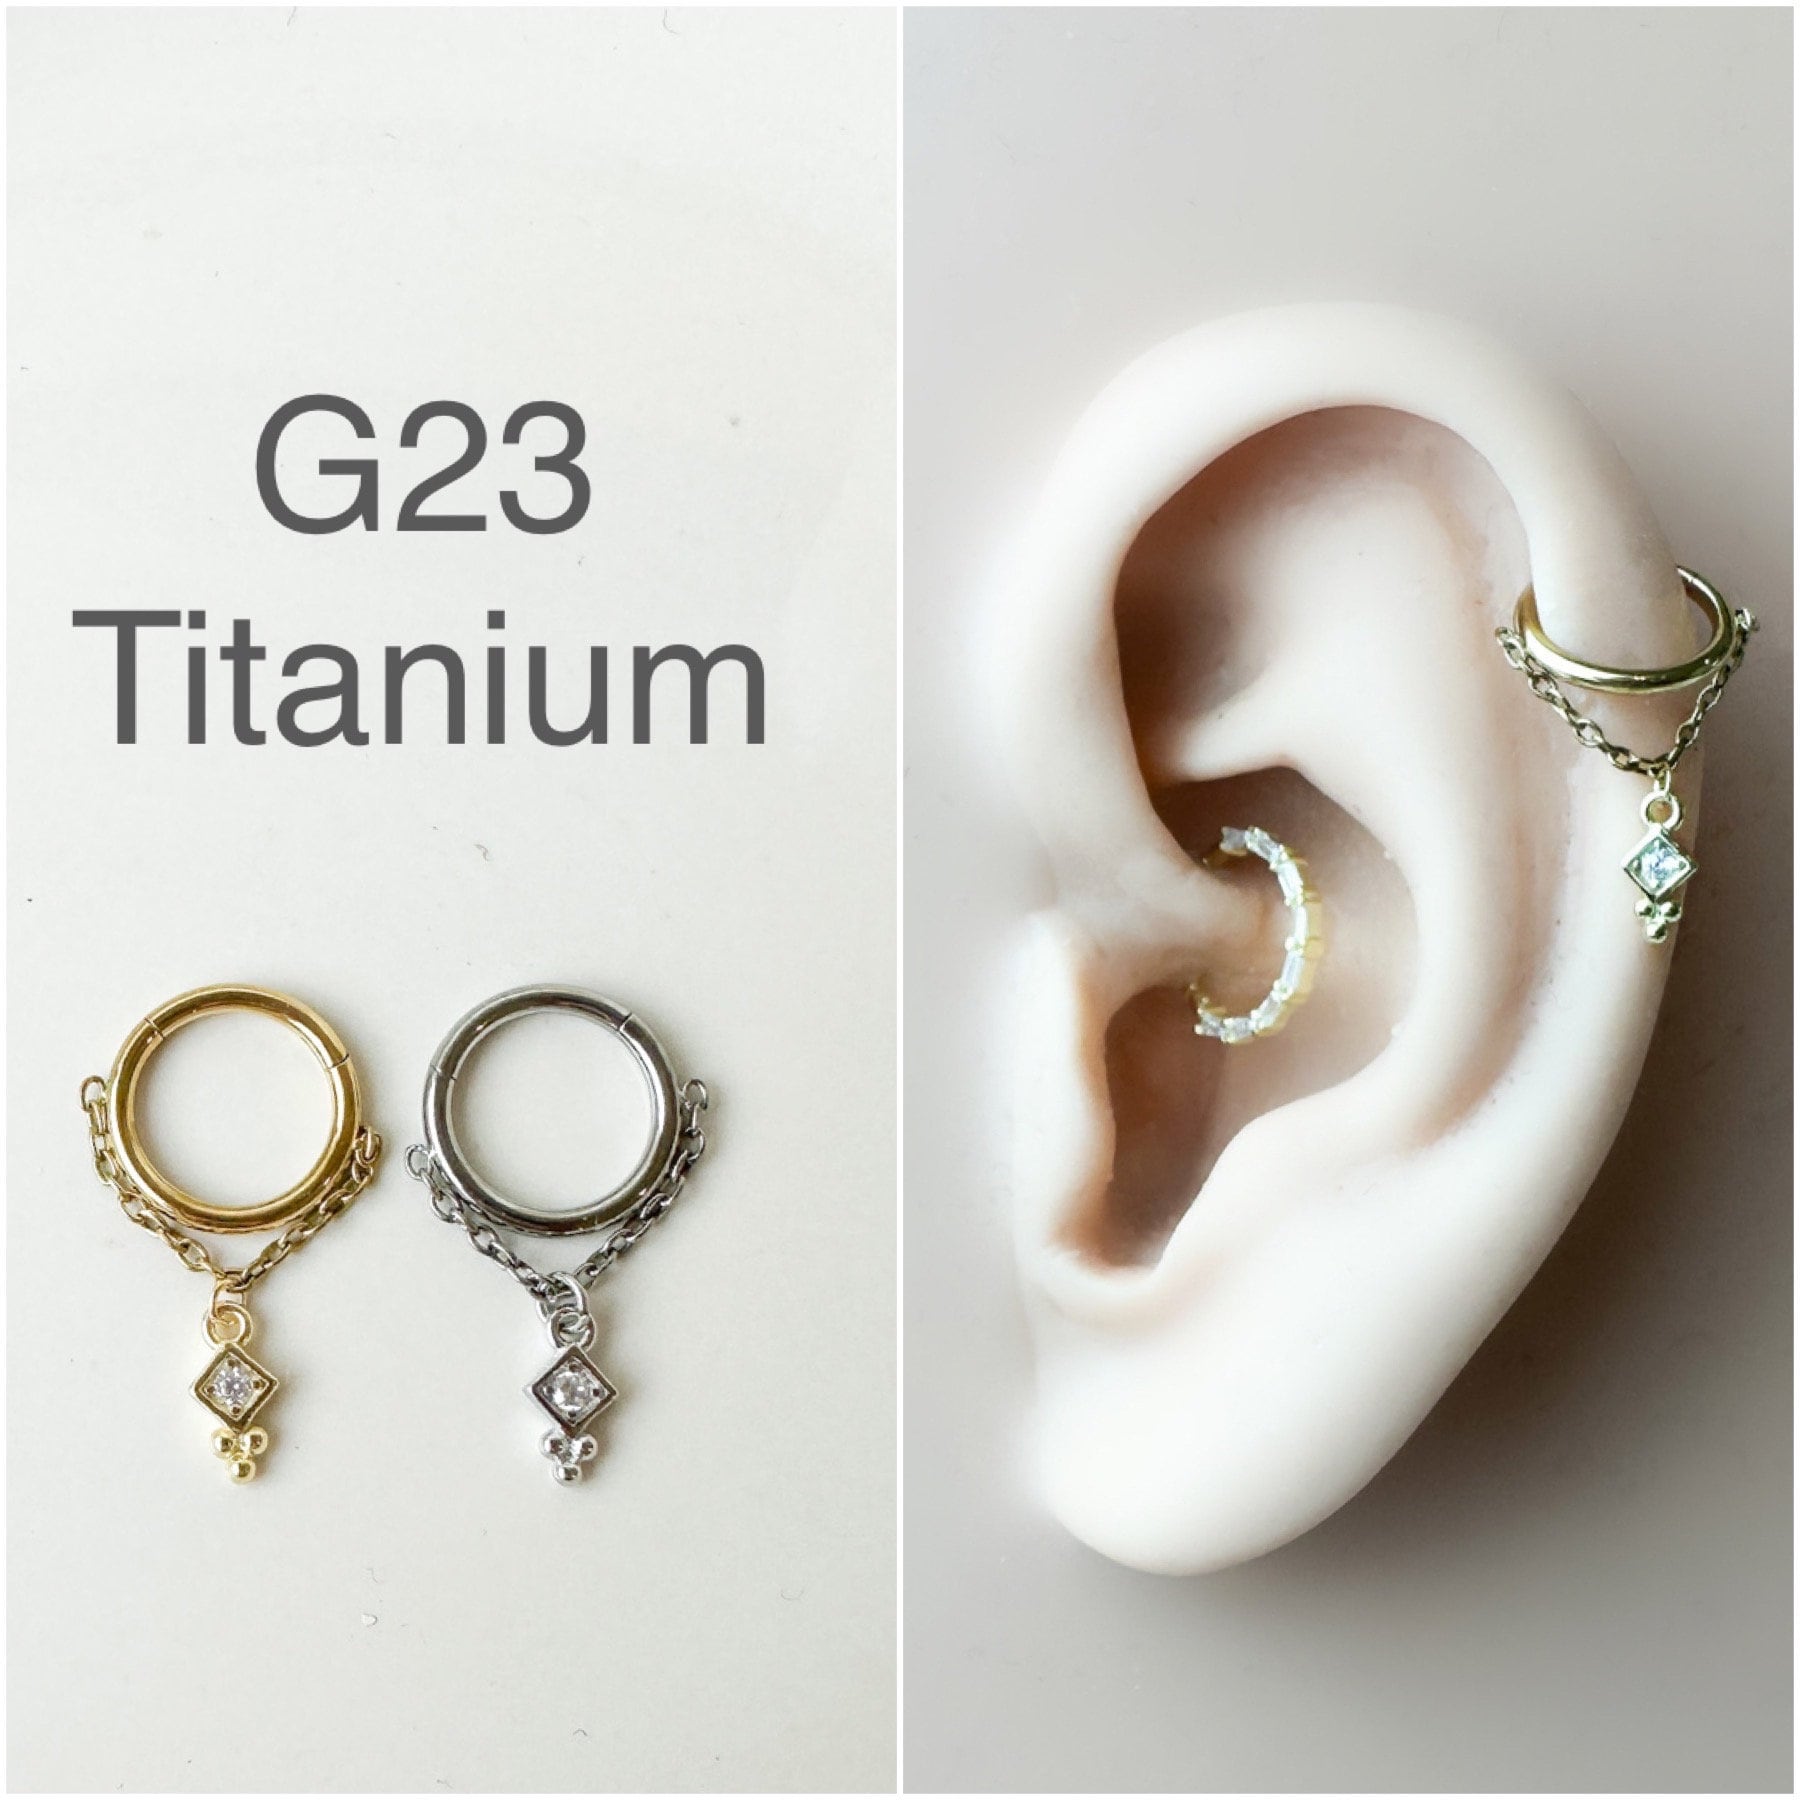 Titanium helix earrings with CZ 2 pieces